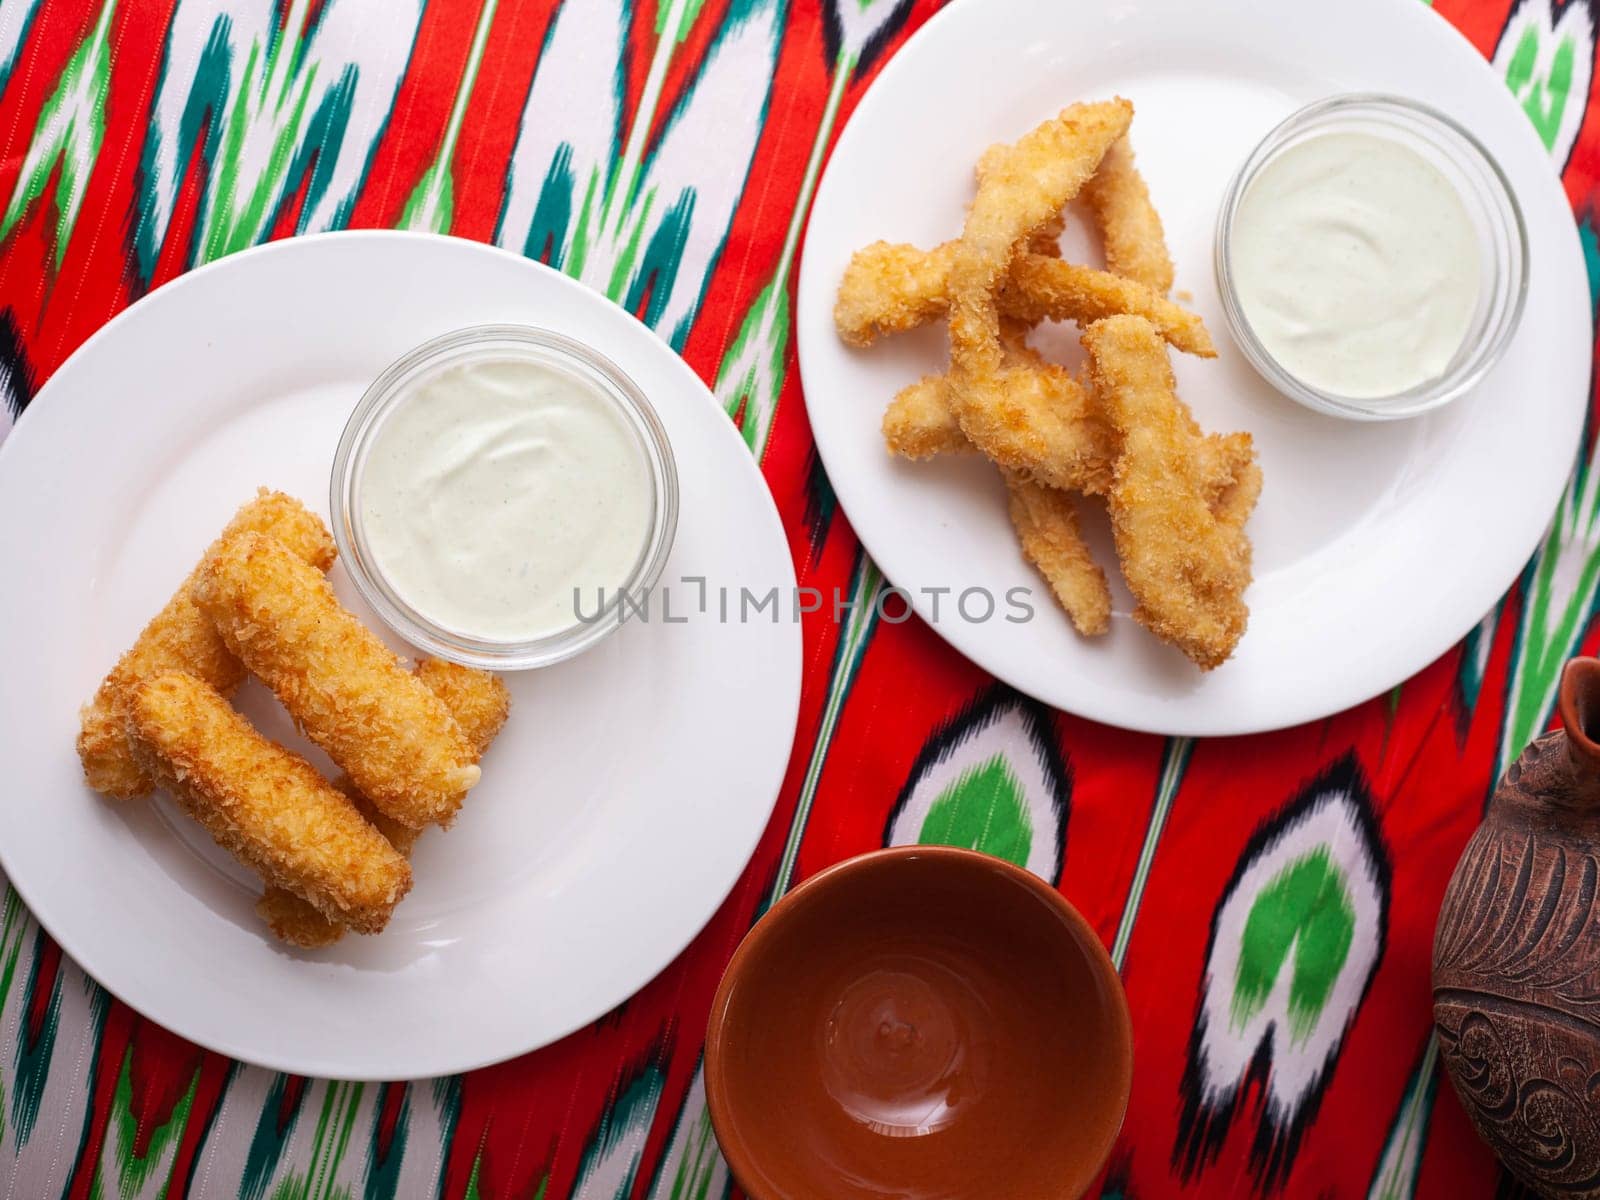 cheese sticks and chicken nuggets - fried cheese and breaded fried chicken served with a creamy sauce. Asian style by tewolf